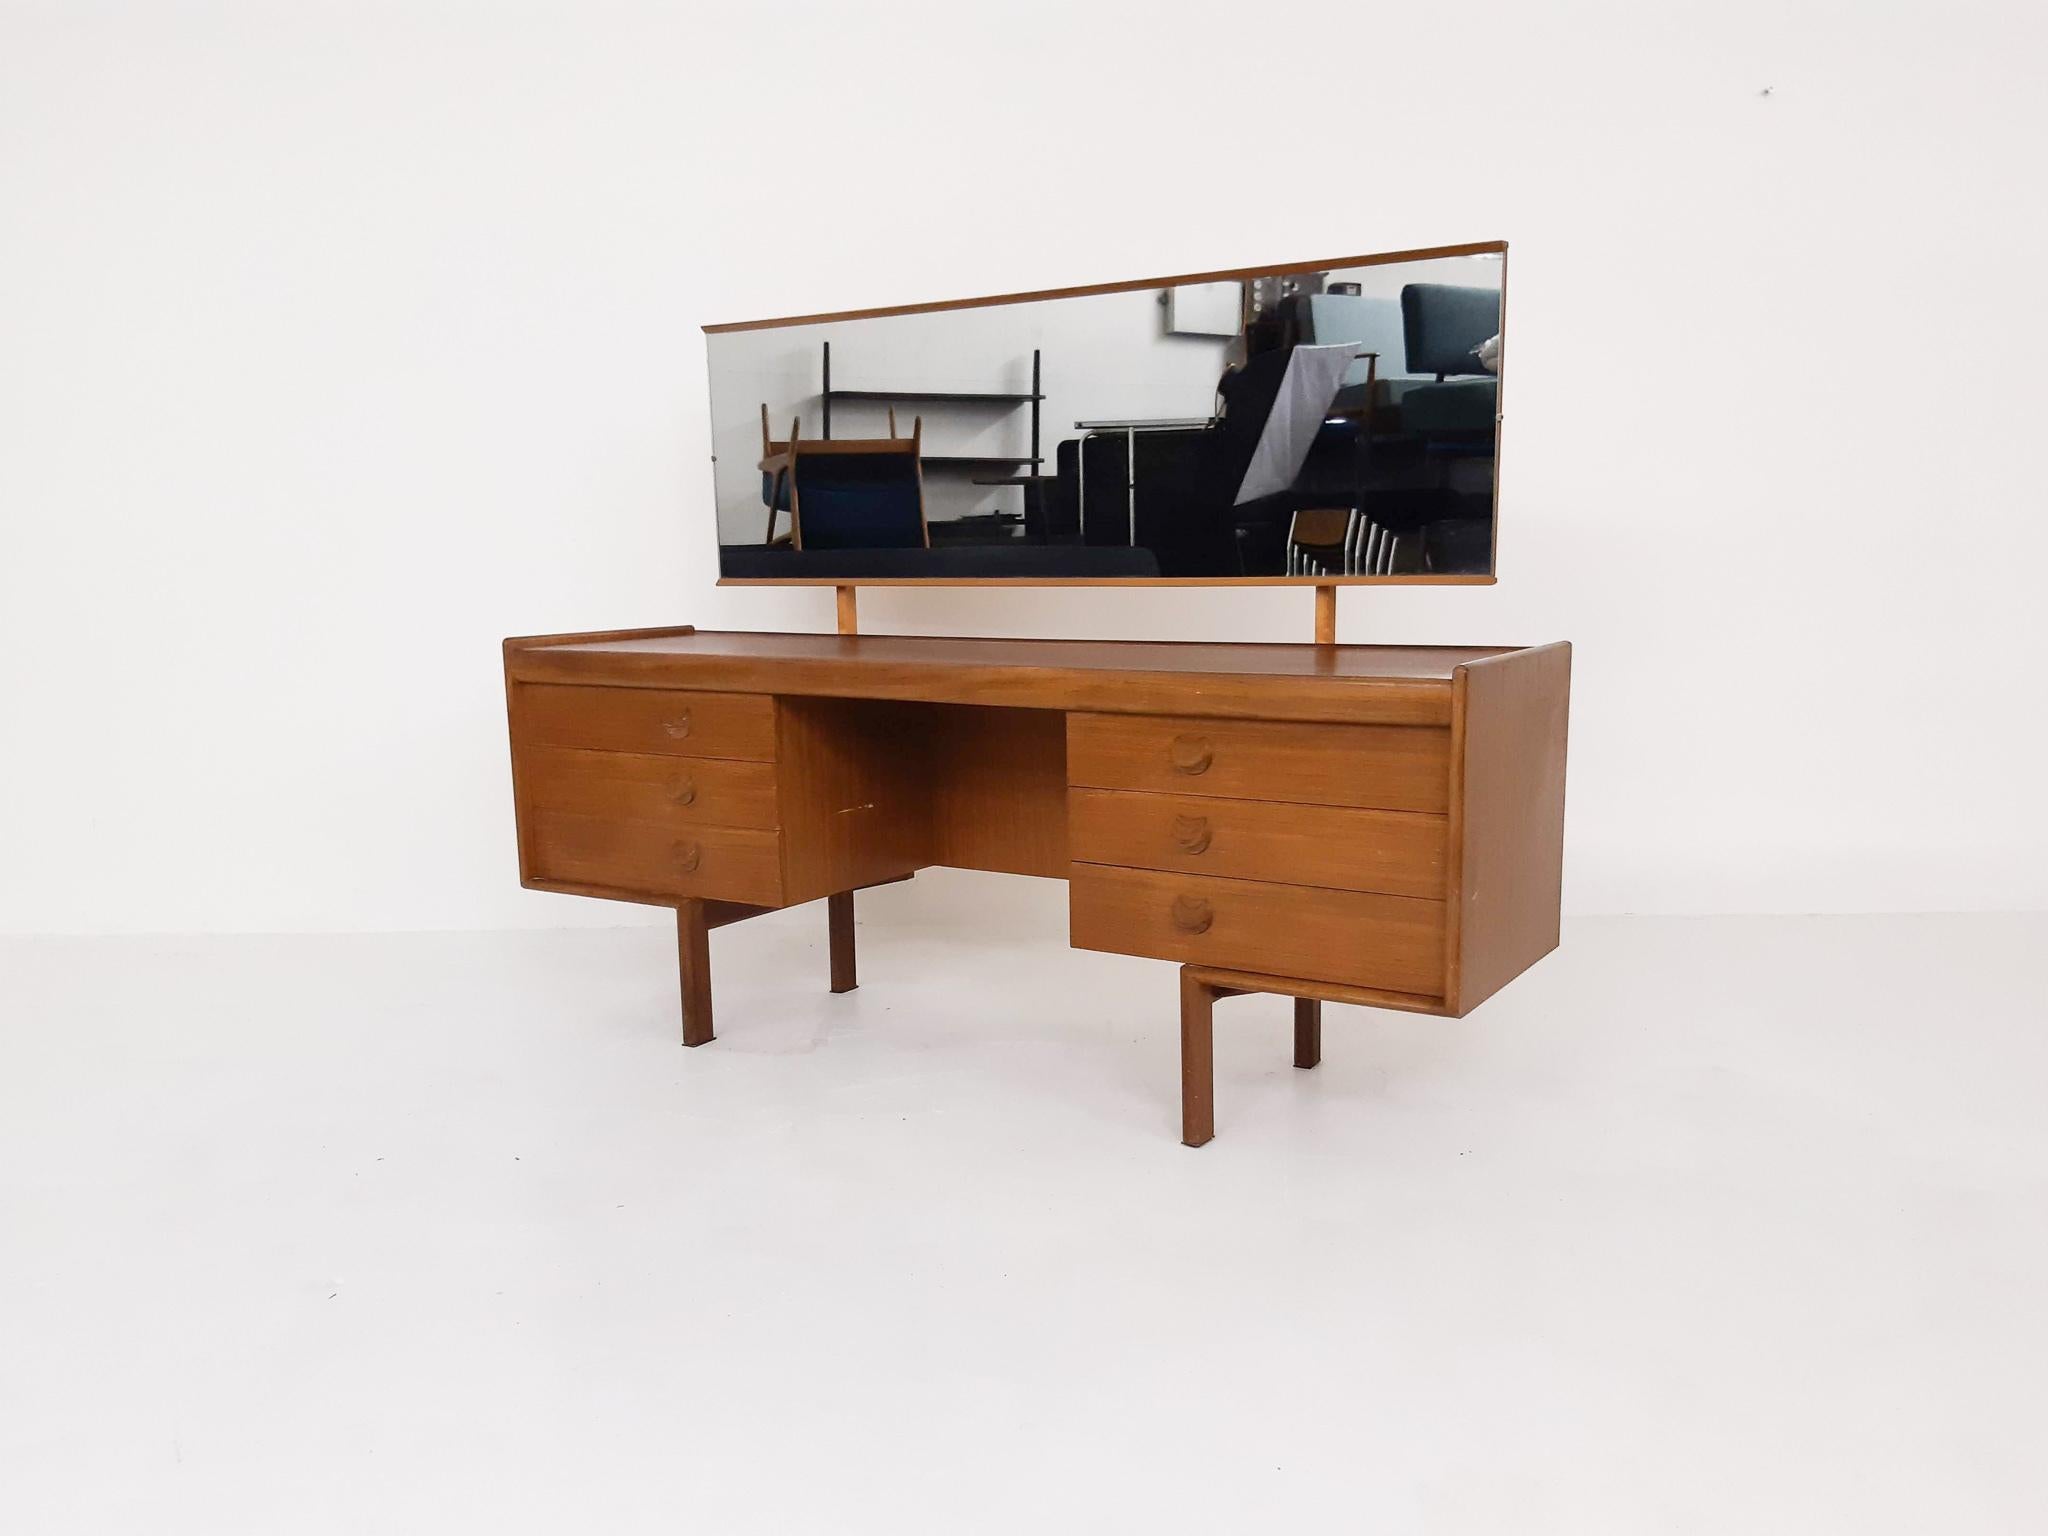 White & Newton teak dressing table with mirror.
Height of the table is: 58 cm.